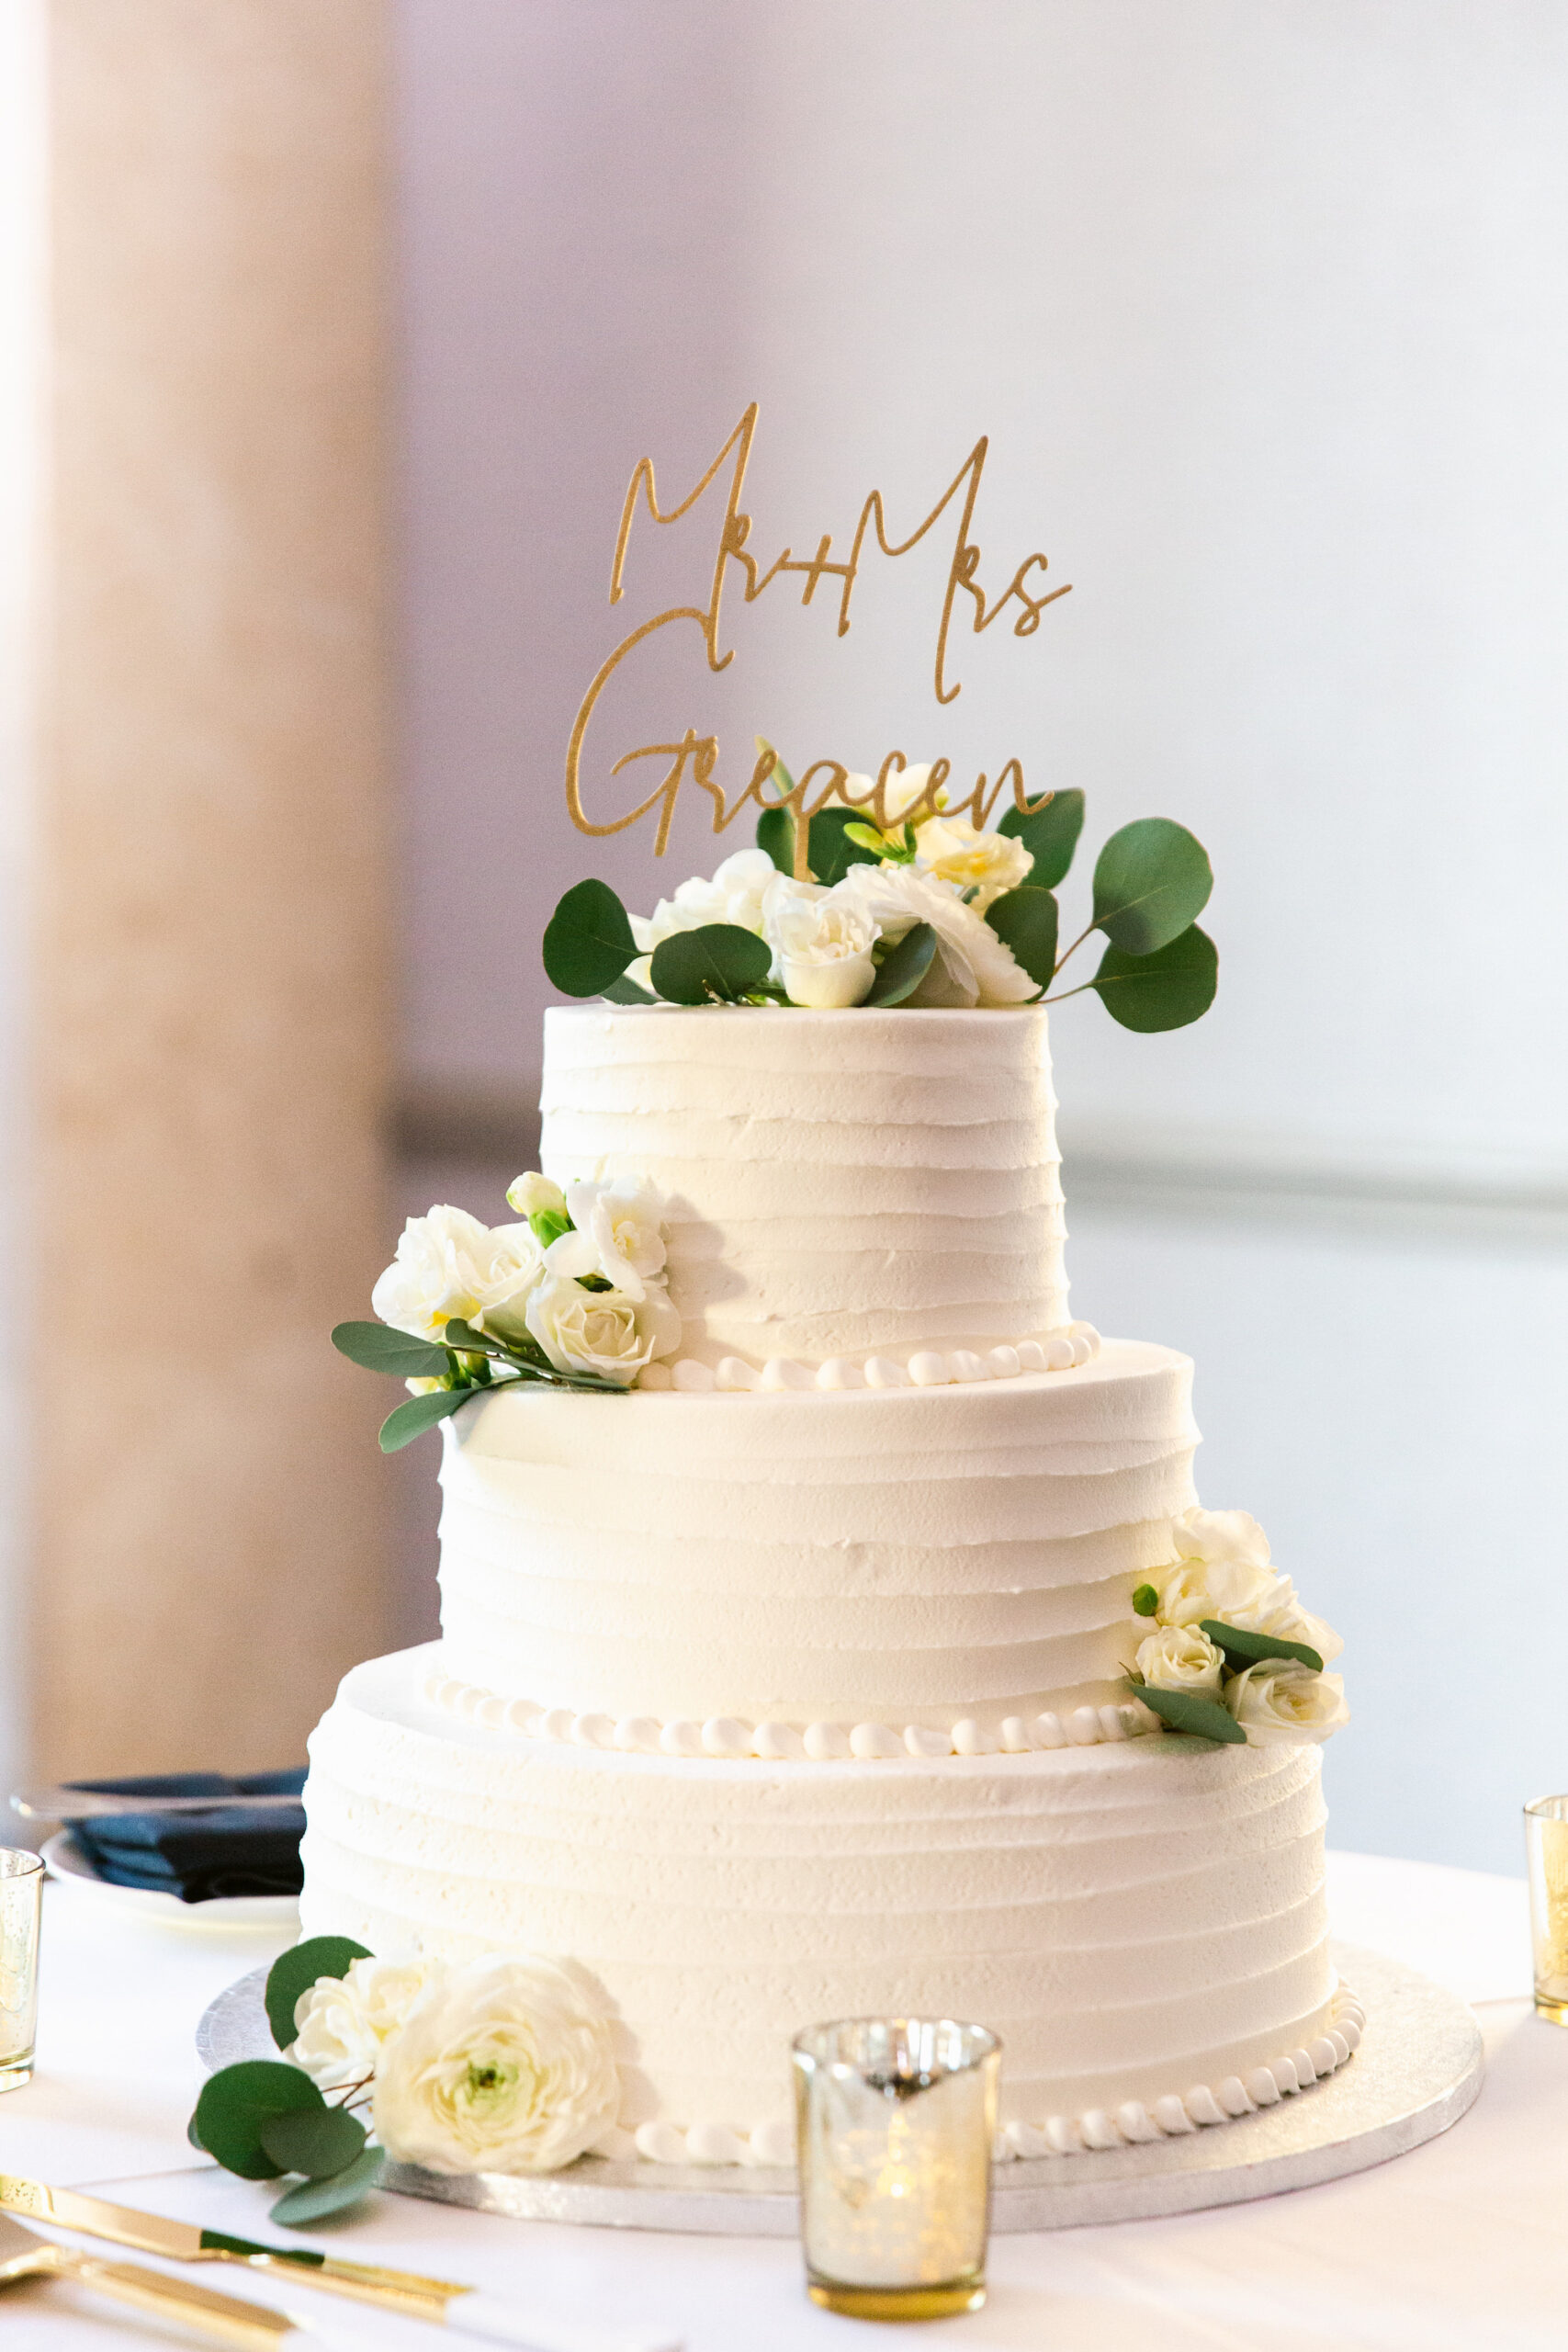 Classic White Three Tier Round Wedding Cake Decorated with White Roses and Green Eucalyptus Leafs, Modern Gold Script Mr. and Mrs. Last Name Wedding Topper